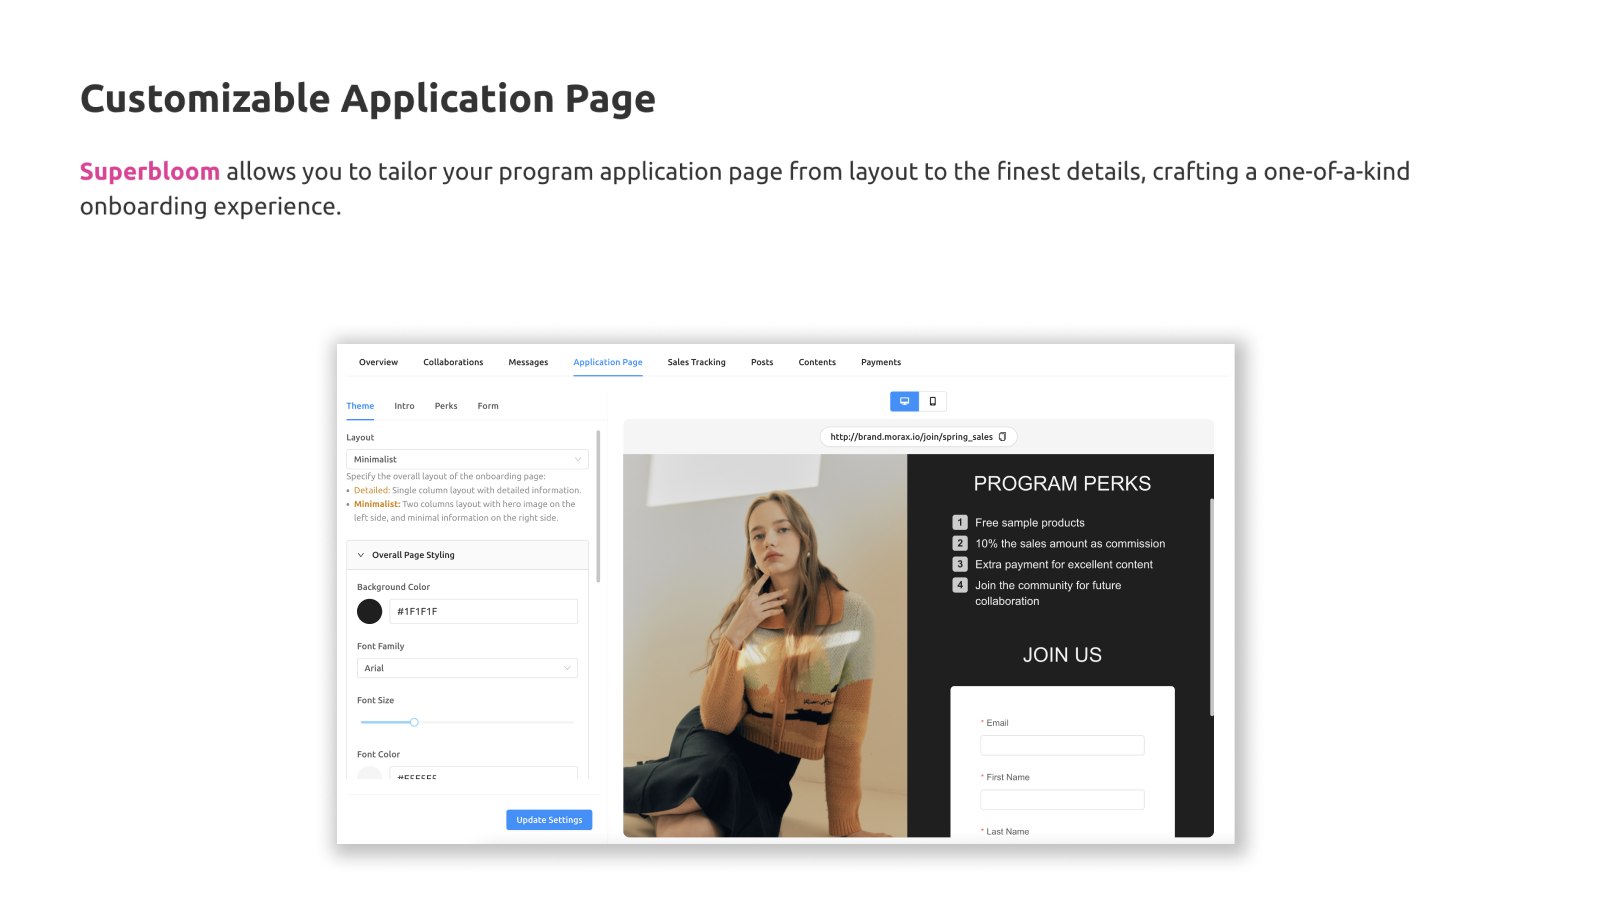 Customizable Application Page